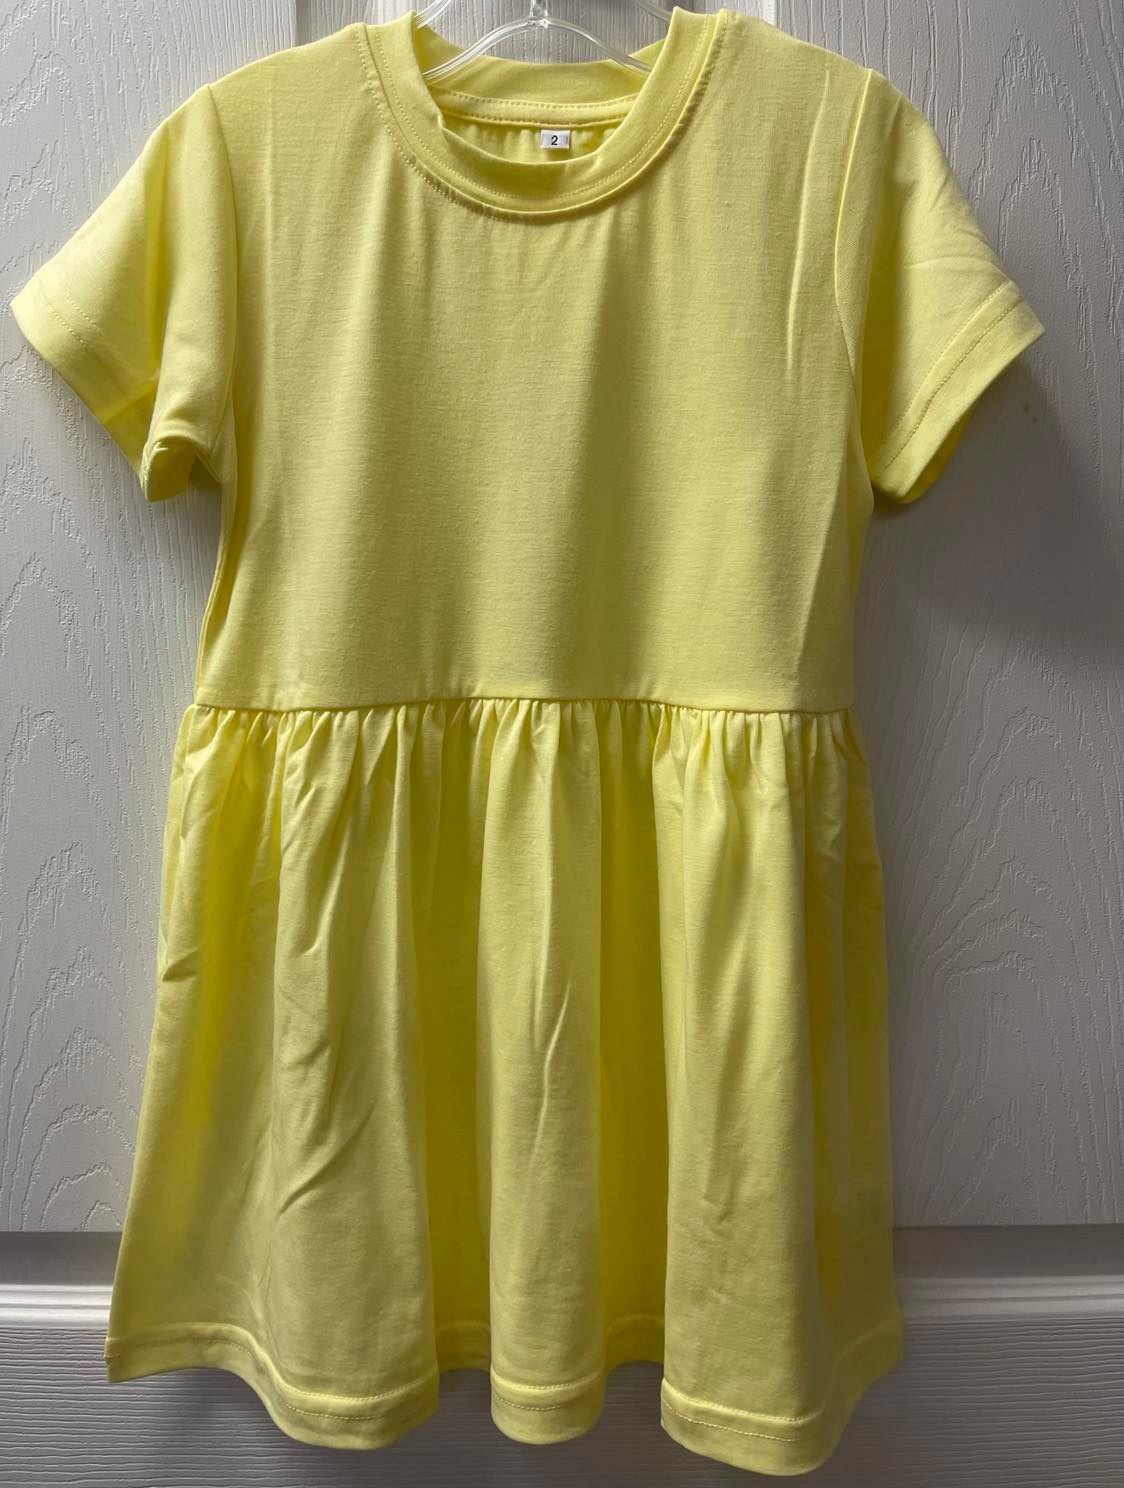 Apparel /Childrens/COLORED True to size Dresses